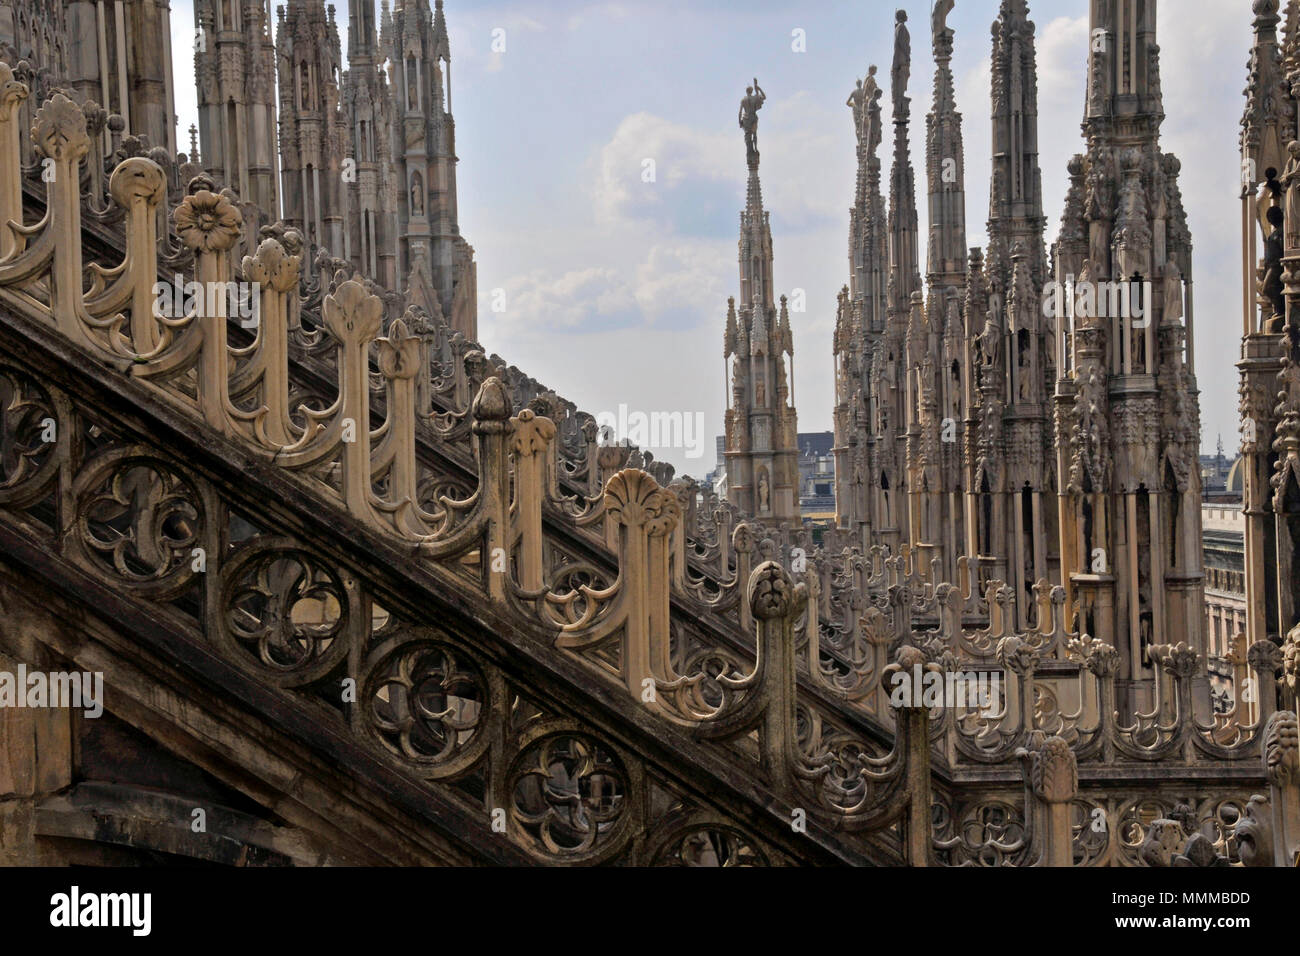 View of several gothic towers at the rooftop of the Duomo Cathedral, Milan, Italy Stock Photo